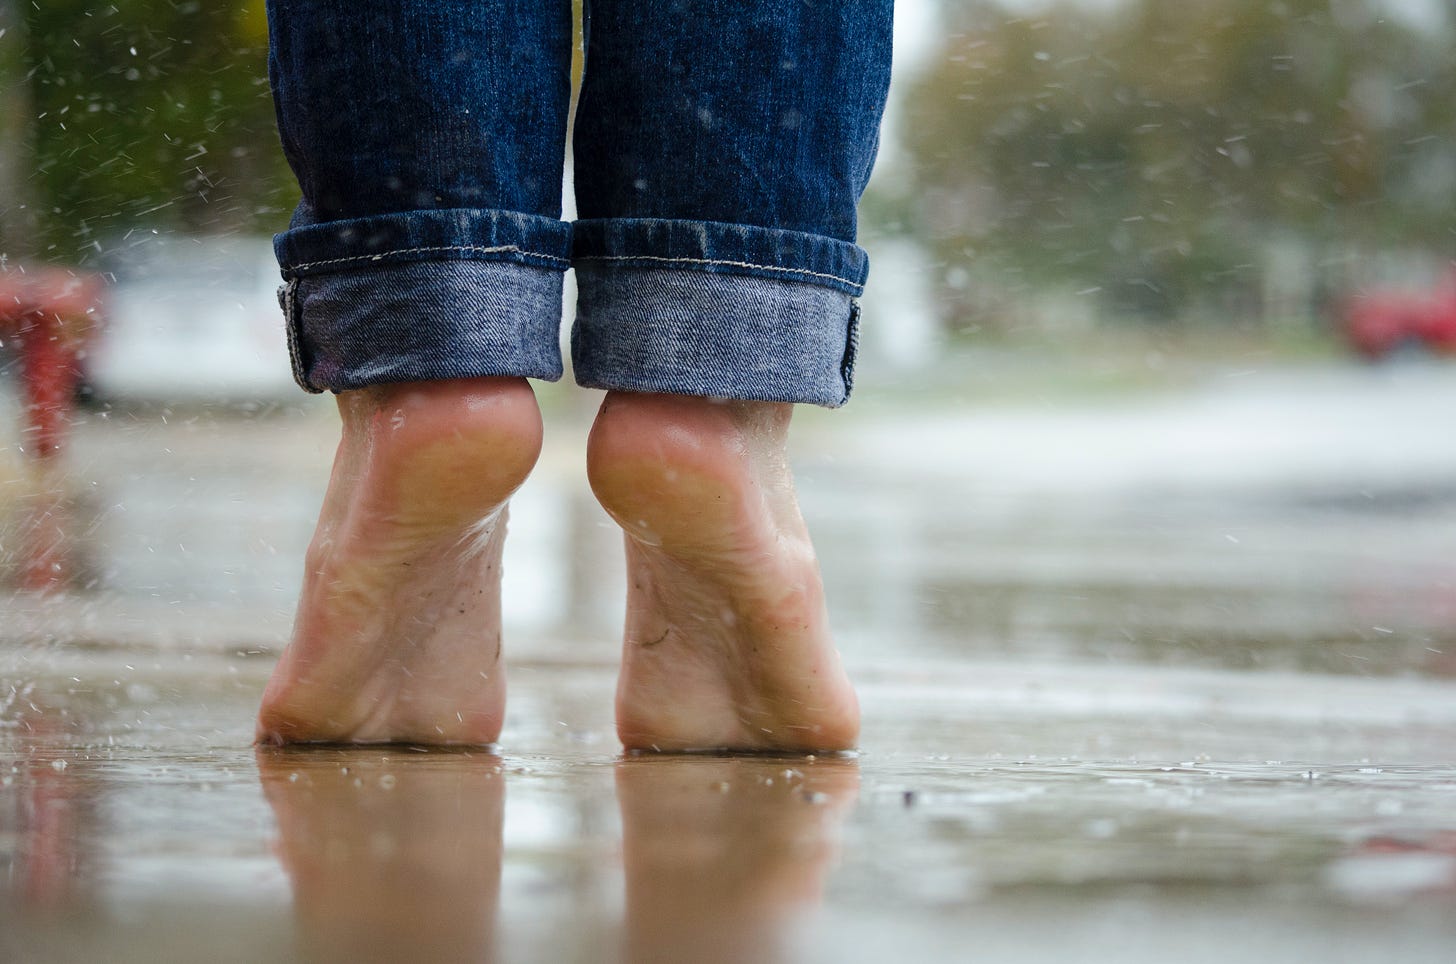 A person's bare feet outside on a rainy day.